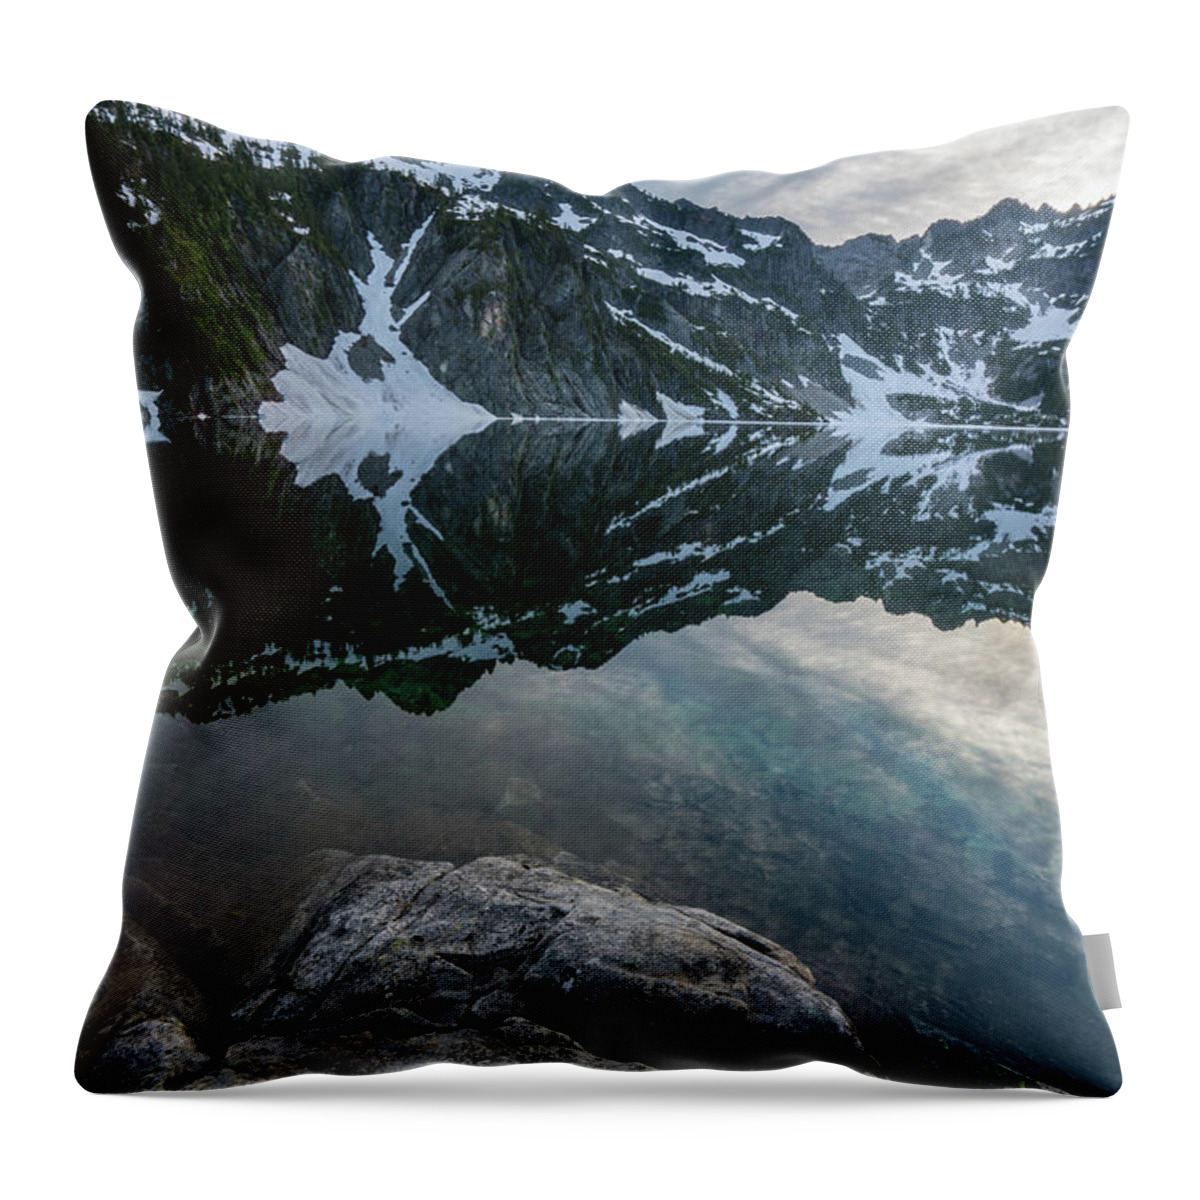 Snow Lake Throw Pillow featuring the photograph Snow Lake Chair Peak Dusk Reflection by Mike Reid